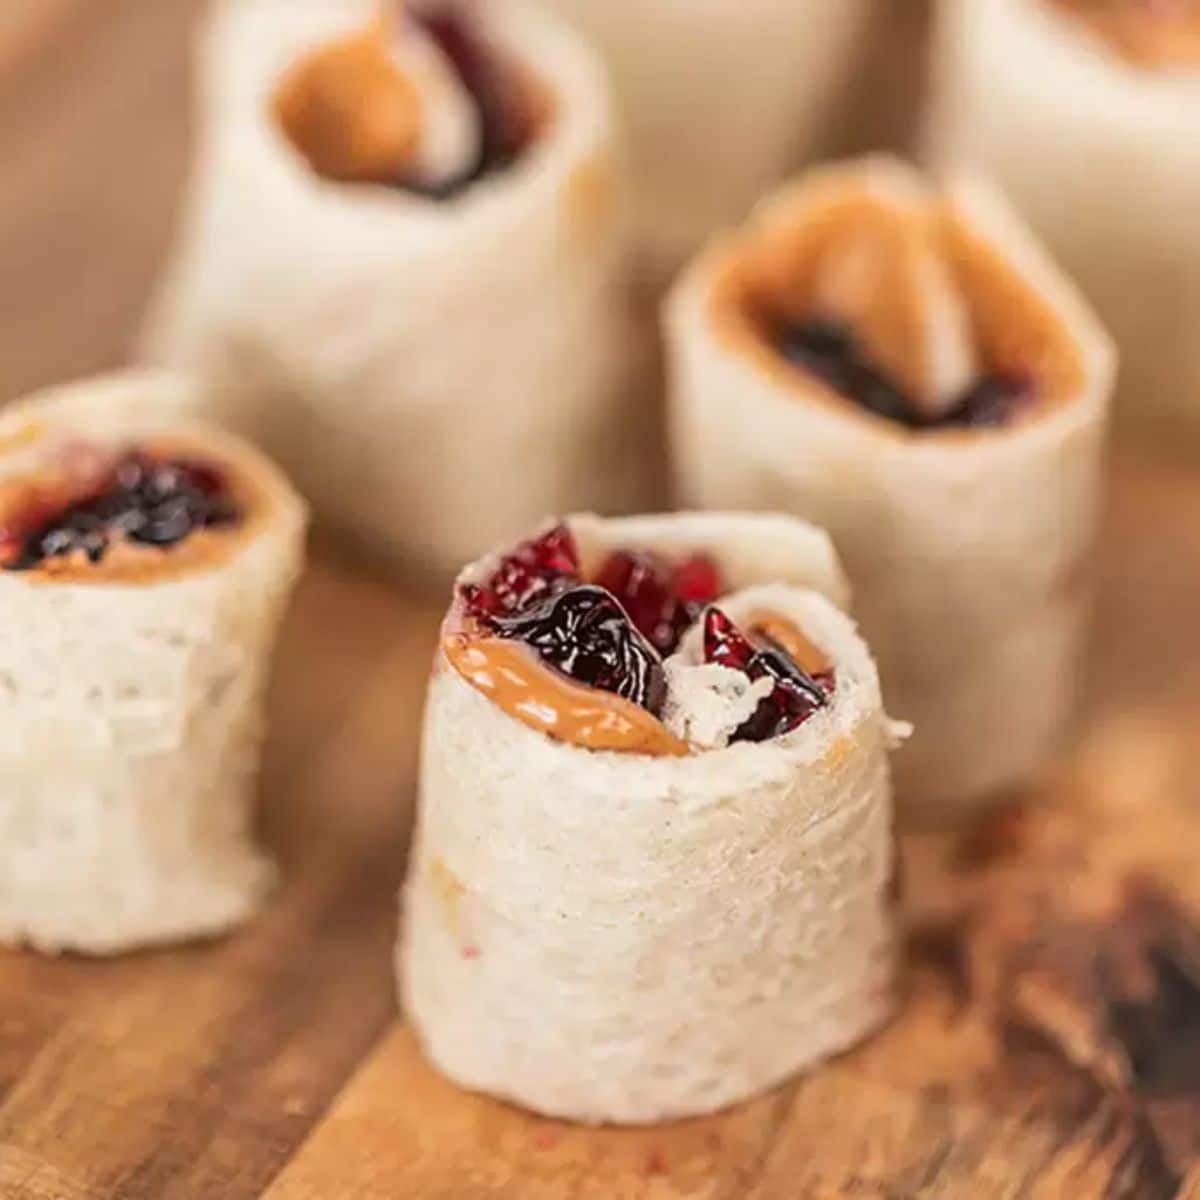 Scrumptious peanut butter and jelly sushi rolls on a wooden table.